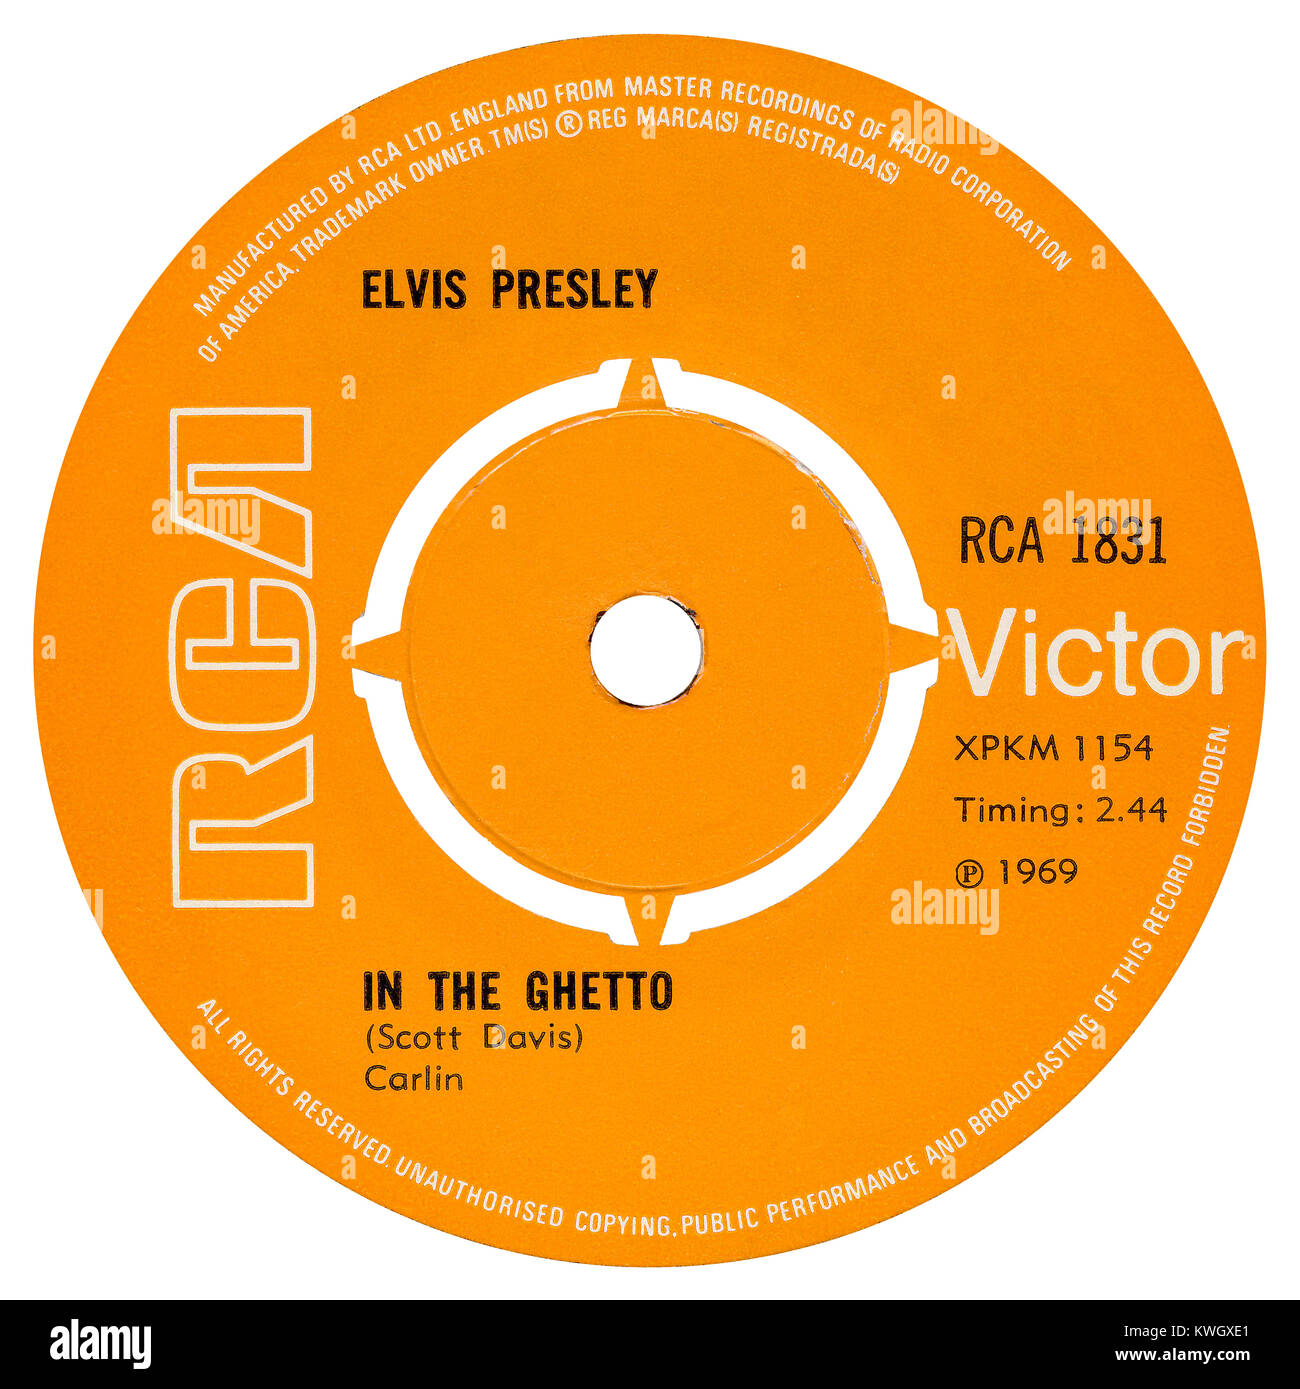 45 RPM 7' UK record label of In The Ghetto by Elvis Presley. Written by Mac Davis under the name Scott Davis and produced by Chips Moman. Released in June 1969 on the RCA Victor label. Stock Photo